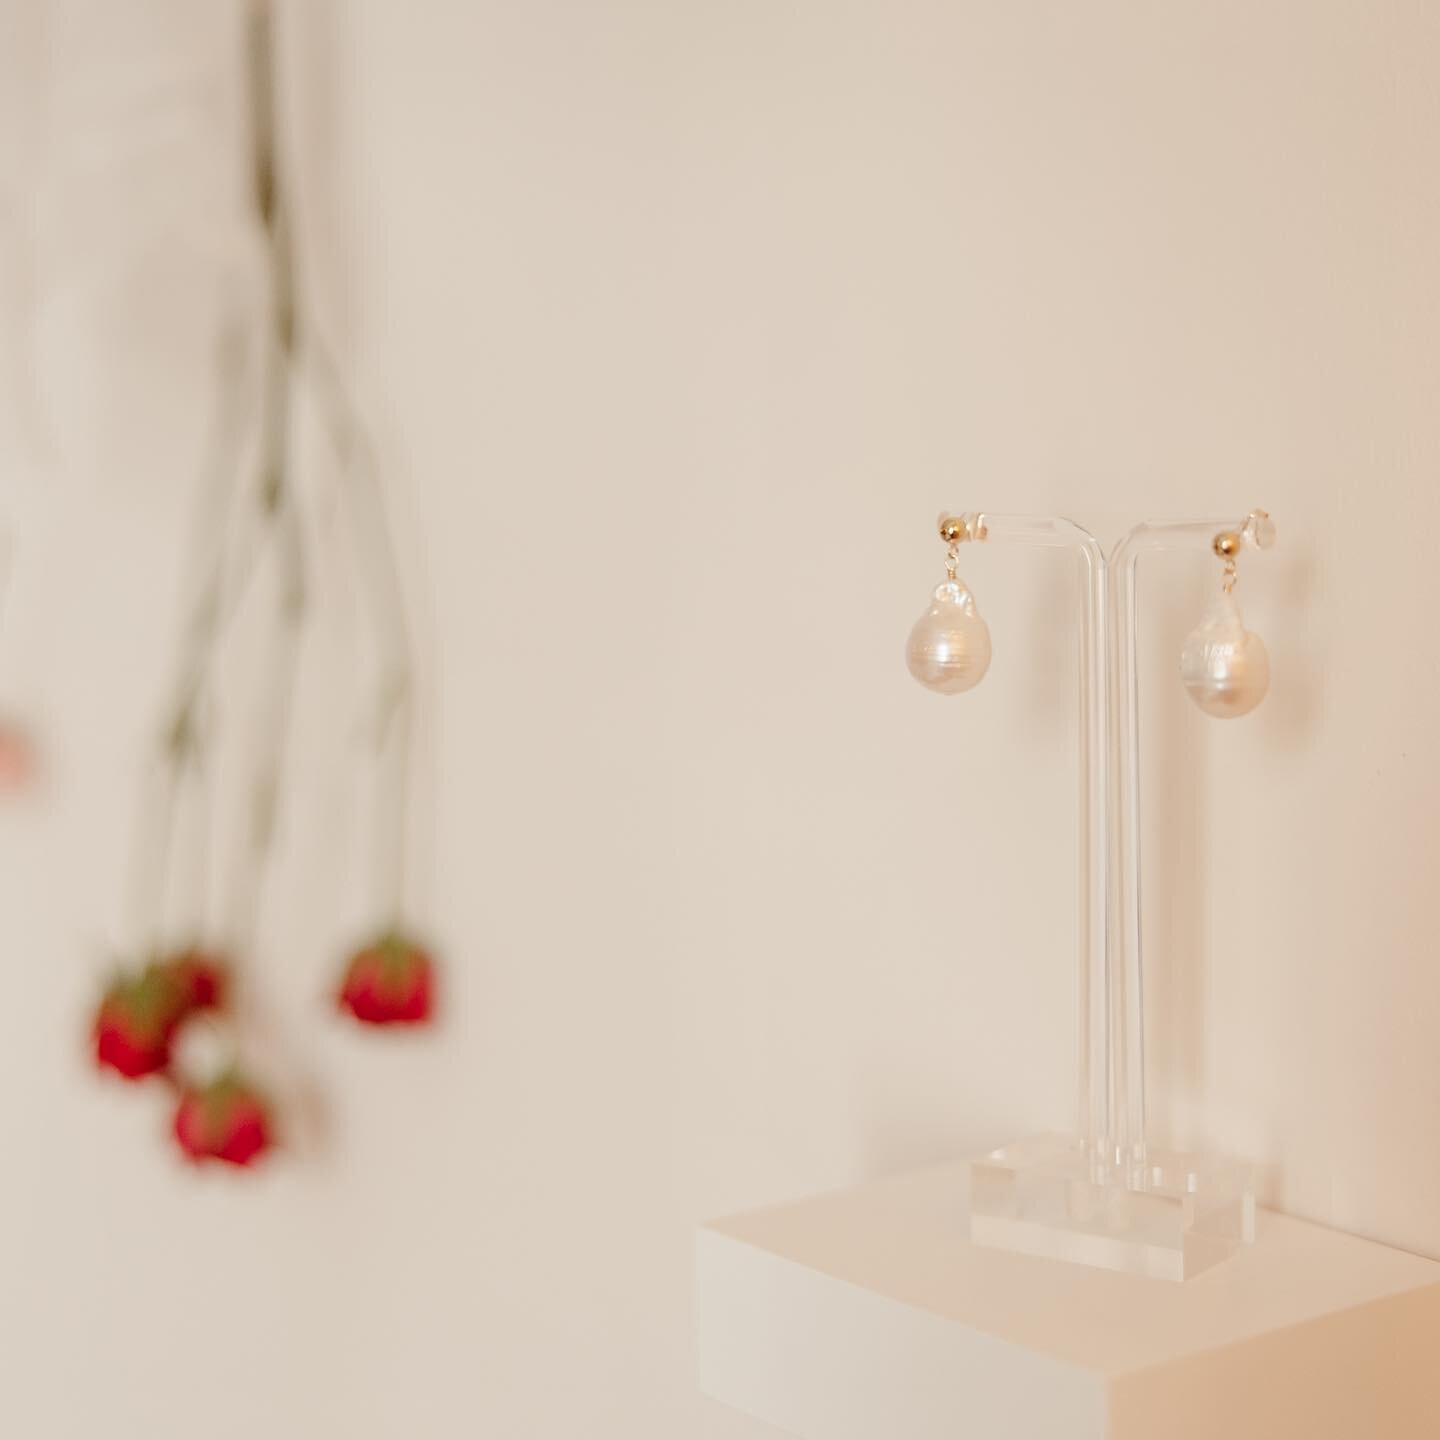 The Douglas will forever have our hearts. ⚡️❤️

Fresh water baroque pearl earrings that make a statement on your wedding day! 

Shop the full collection online, through the link in our bio - or at one of our lovely stockists. 
Photo by @adelaideinnew